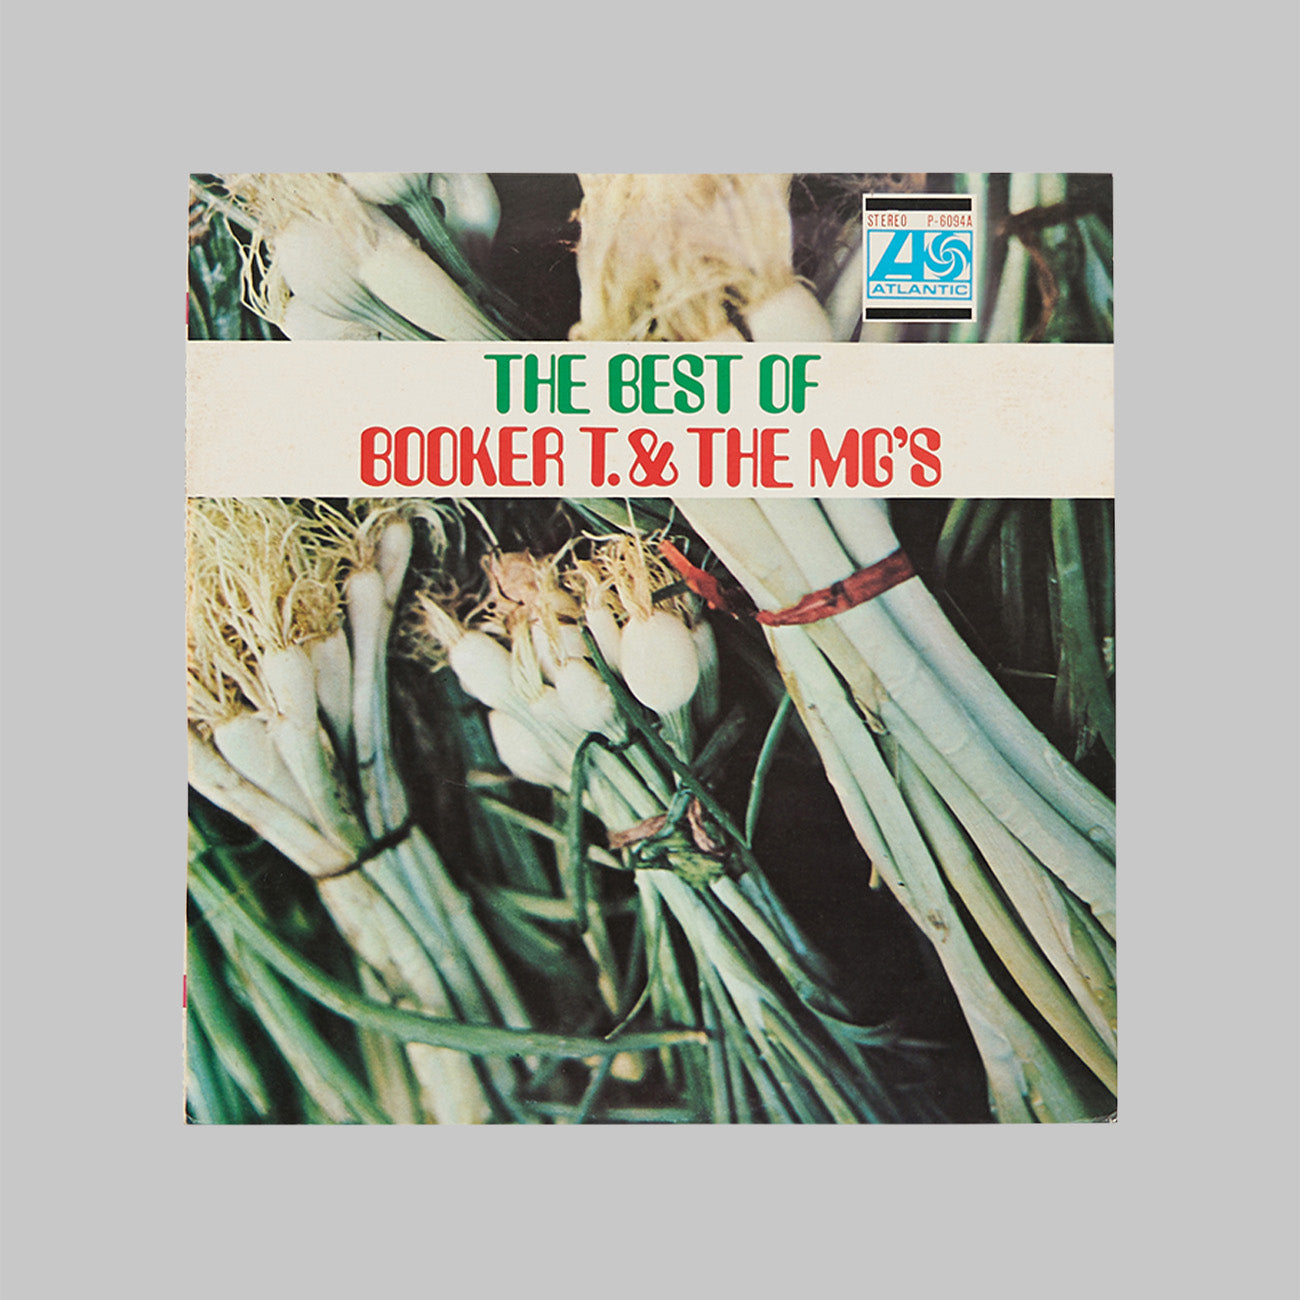 Booker T ＆ The MG’s / The Best Of Booker T. ＆ The MGs